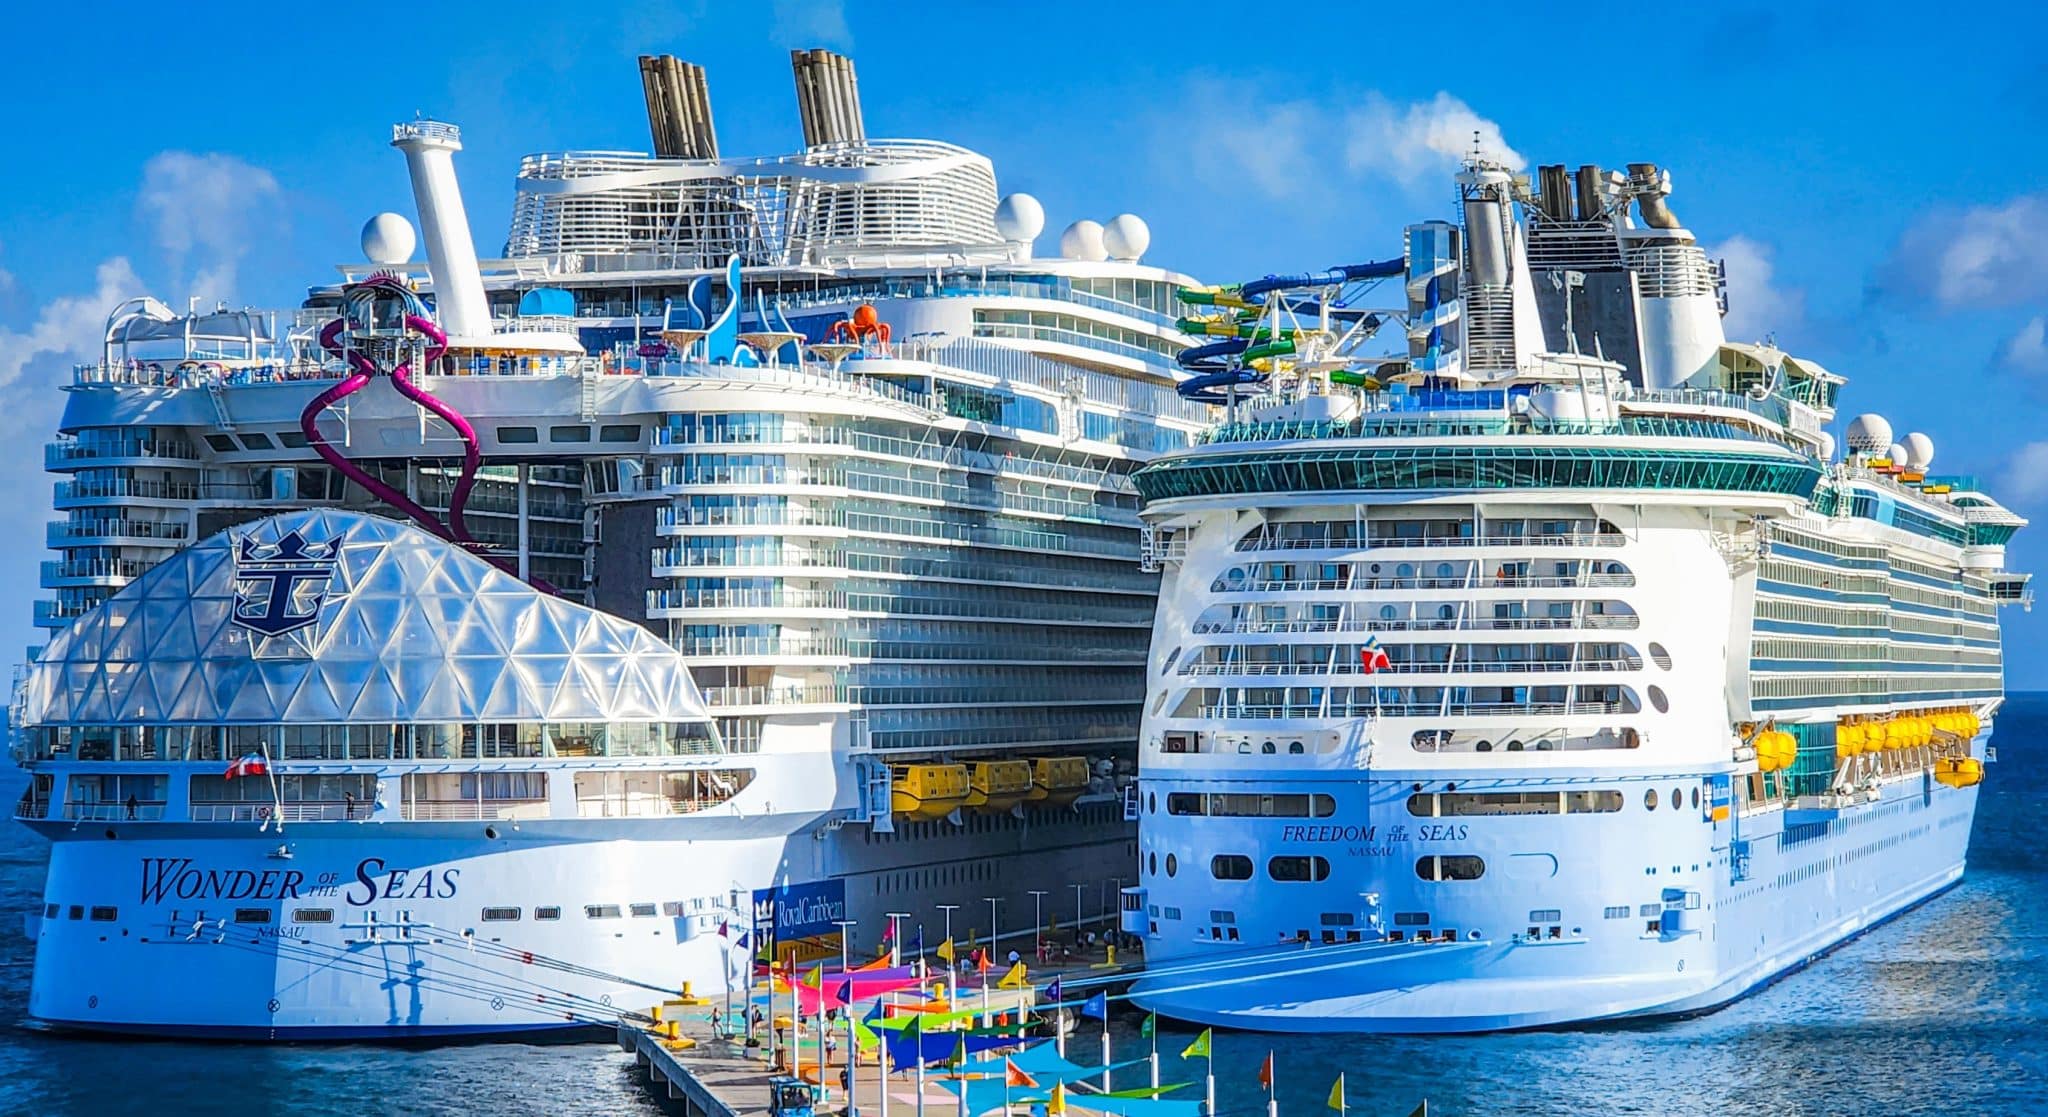 Royal Caribbean offering last minute deals on cruise son 17 ships